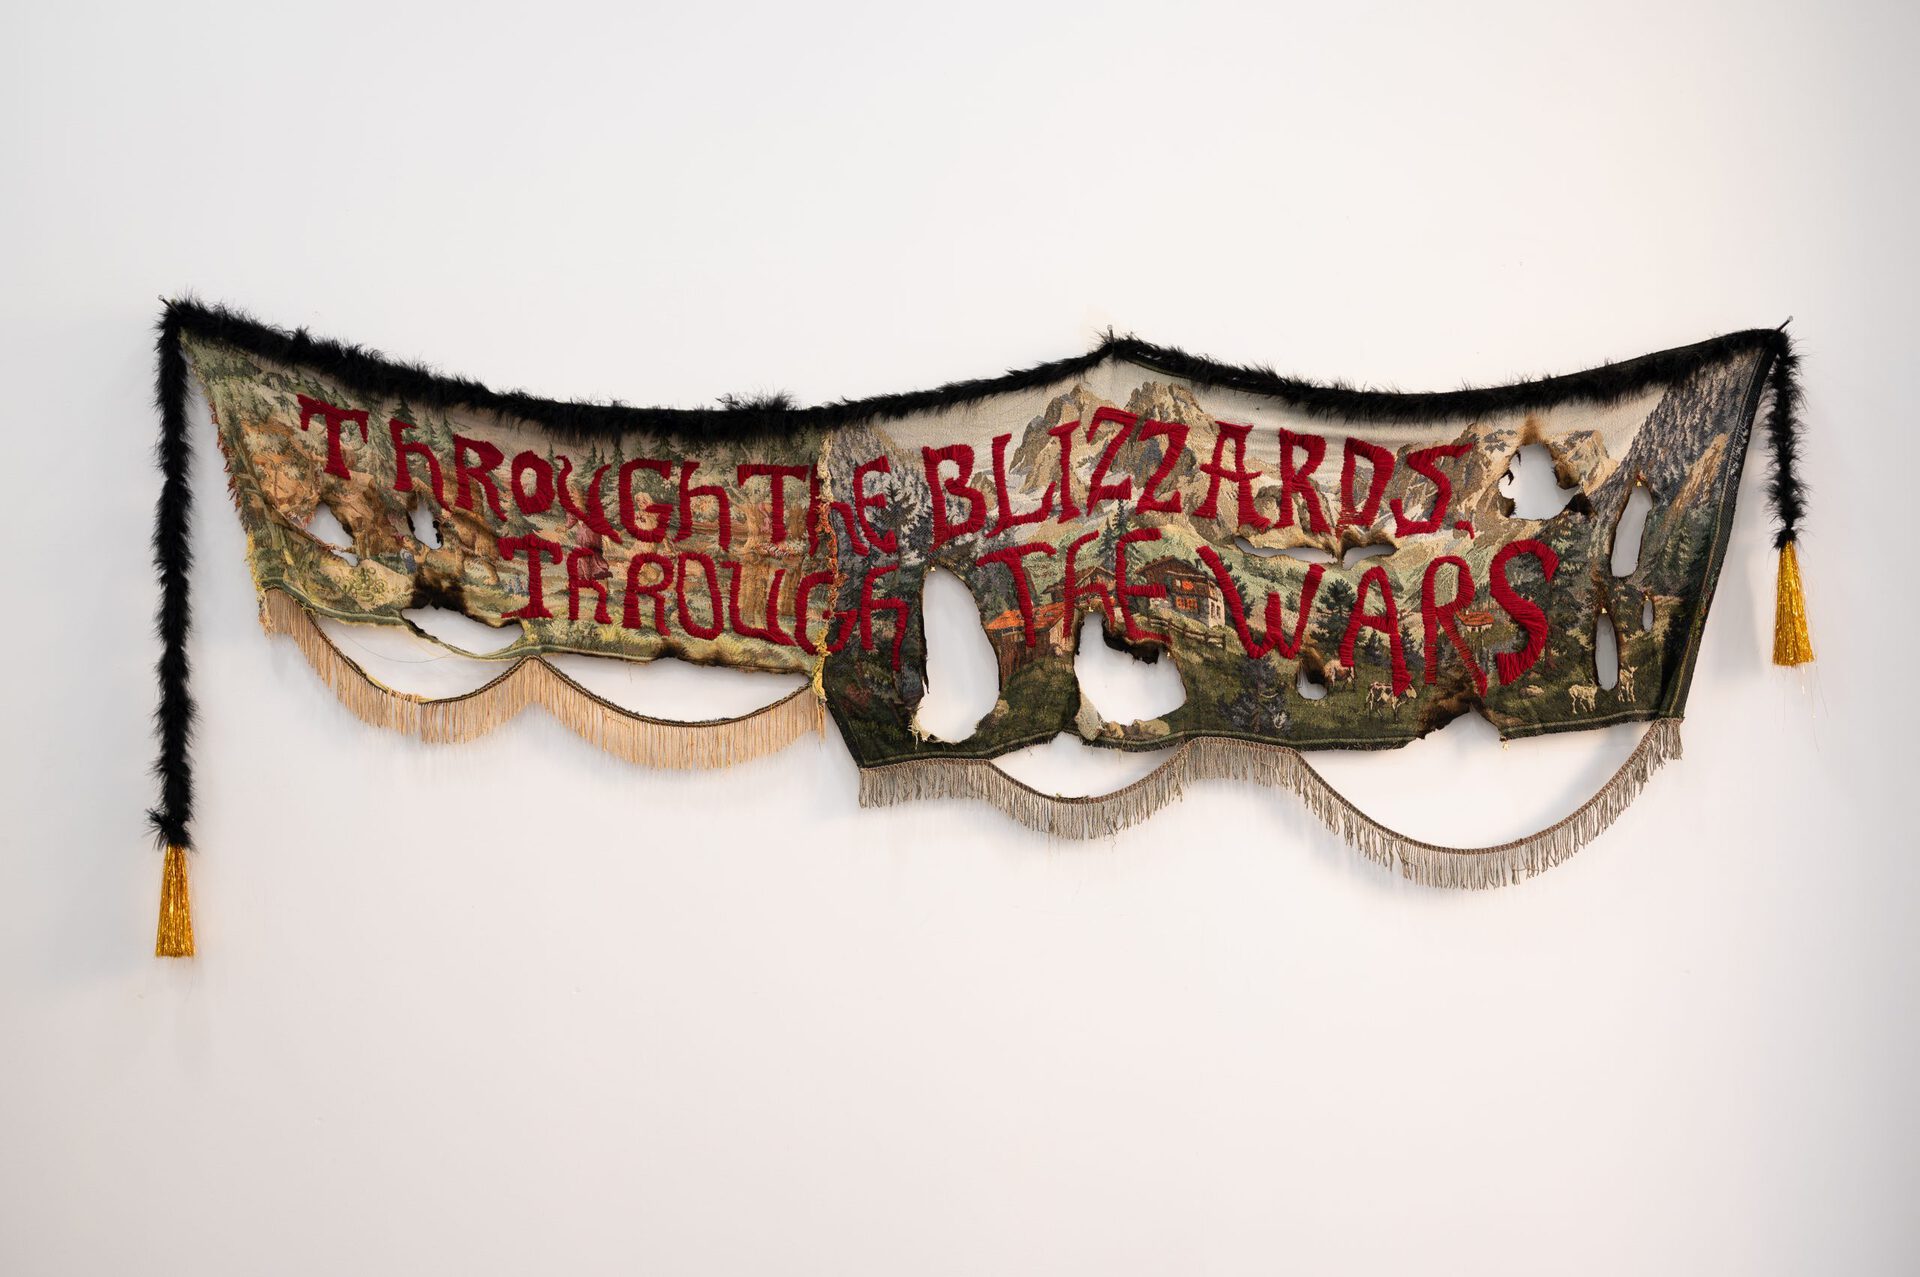 Gvantsa Jishkariani, THROUGH THE BLIZZARDS, THROUGH THE WARS, 2022, Embroidery on reworked and burnt vintage Soviet period tapestry with golden fringes. 258 x 103cm